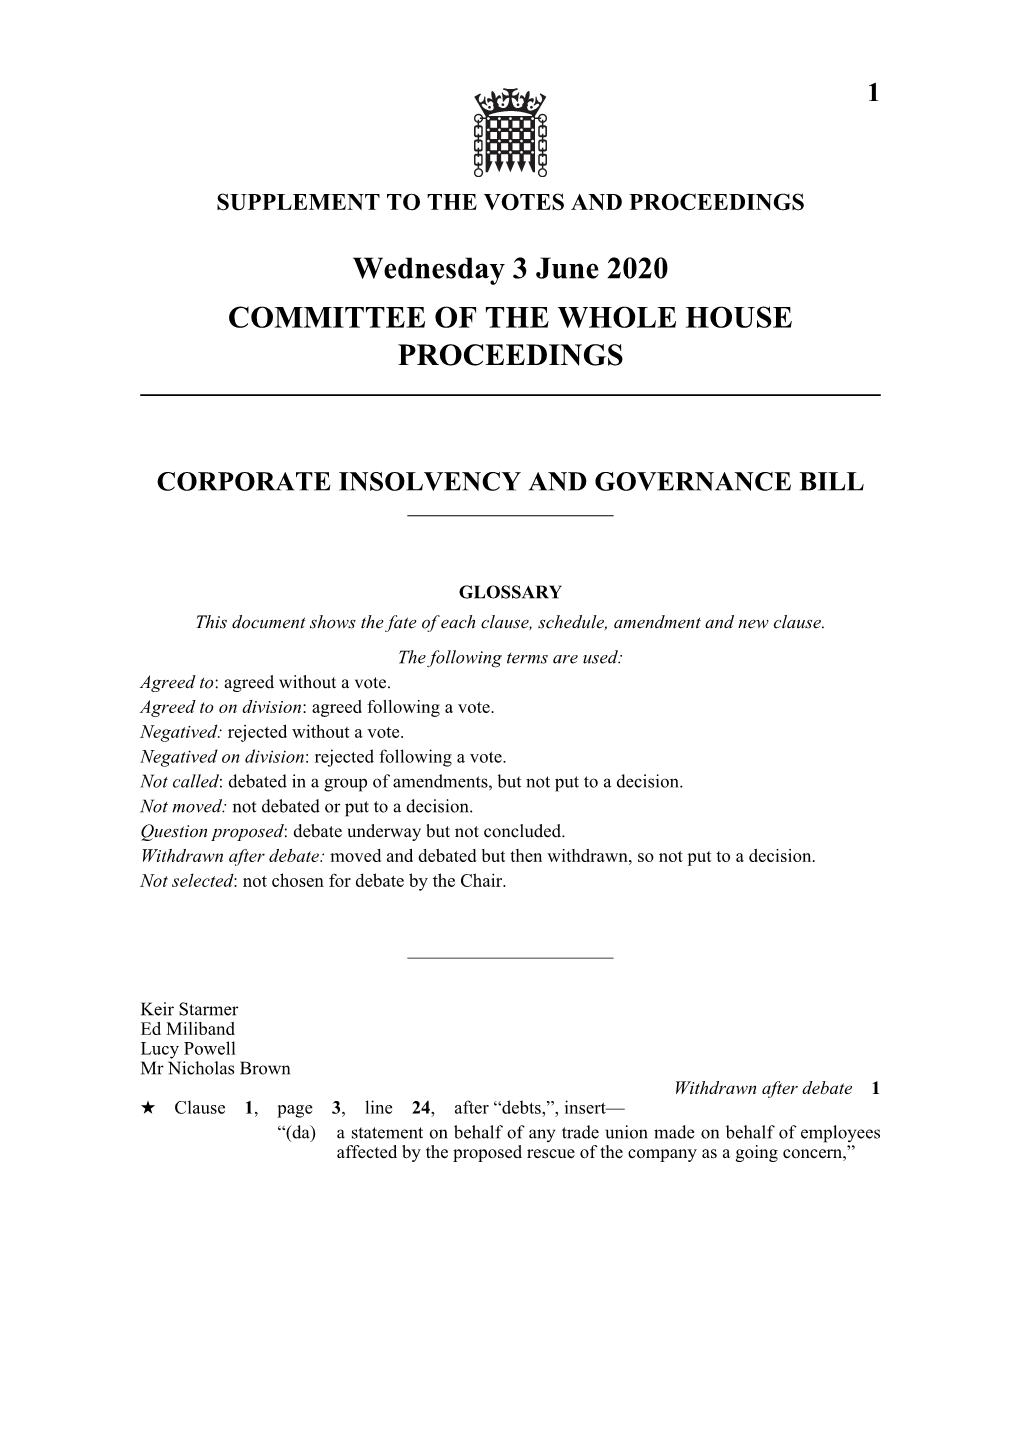 Wednesday 3 June 2020 COMMITTEE of the WHOLE HOUSE PROCEEDINGS